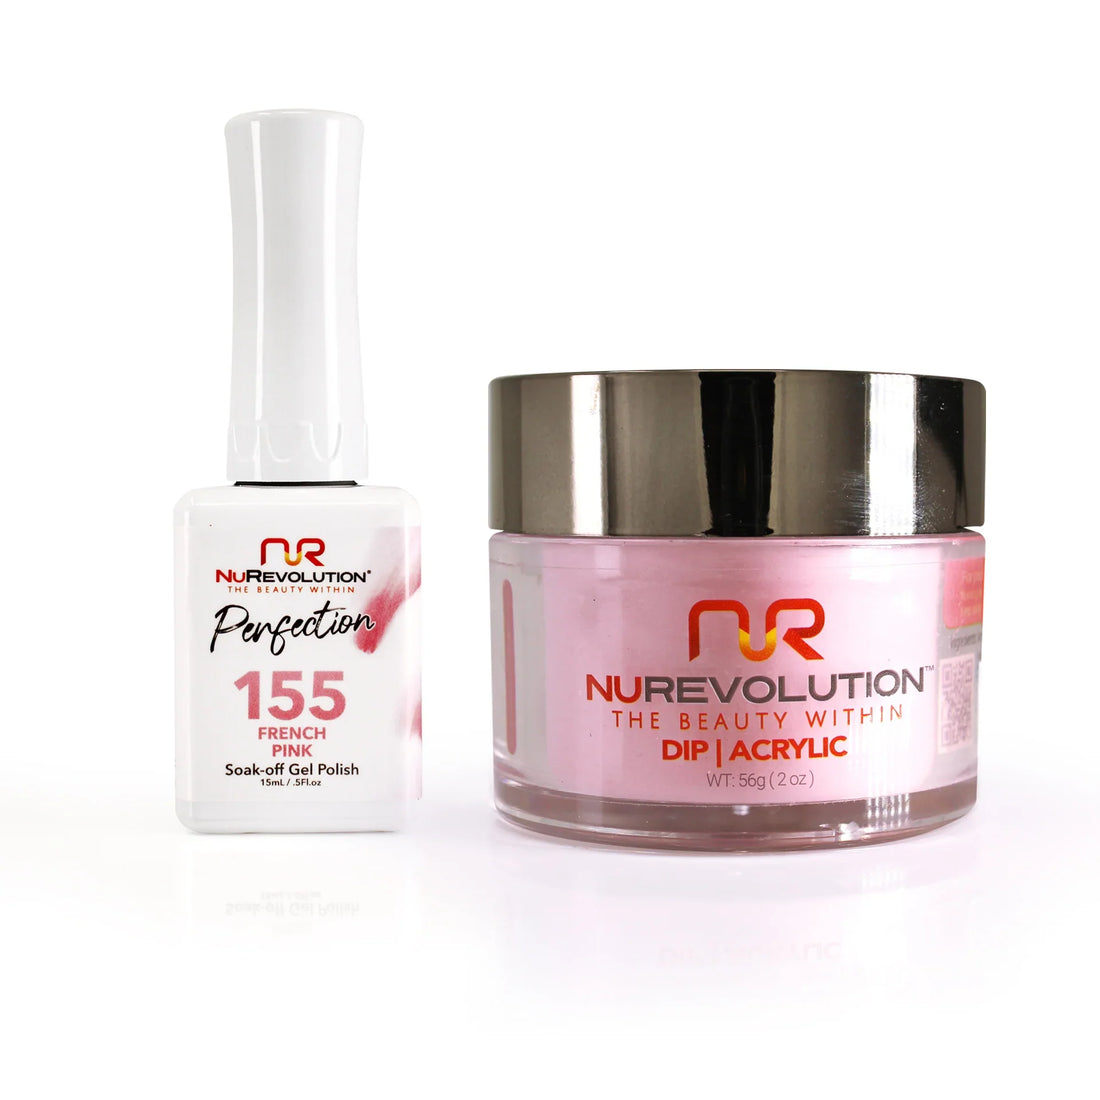 NuRevolution Perfection 155 French Pink